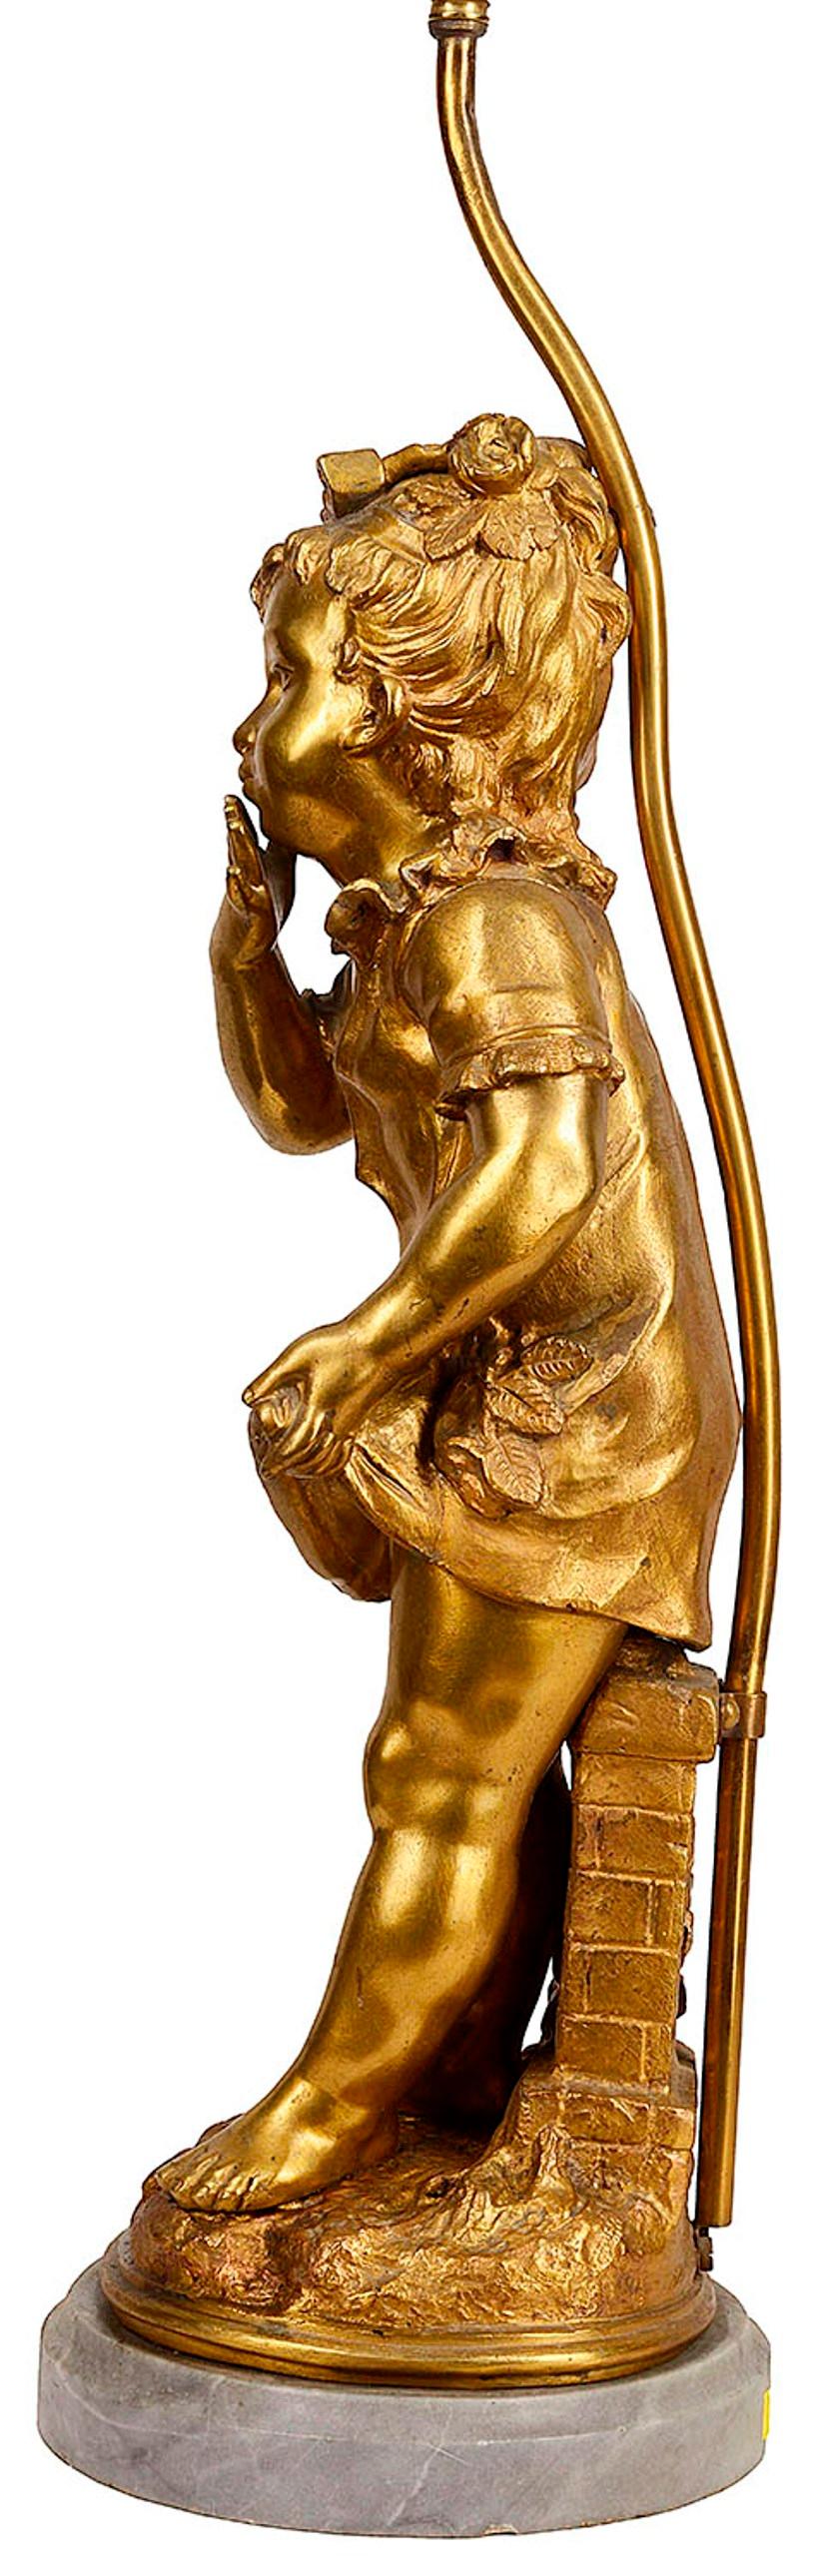 Romantic 19th Century Gilded Bronze Figure of Young Girl Blowing a Kiss / Lamp For Sale